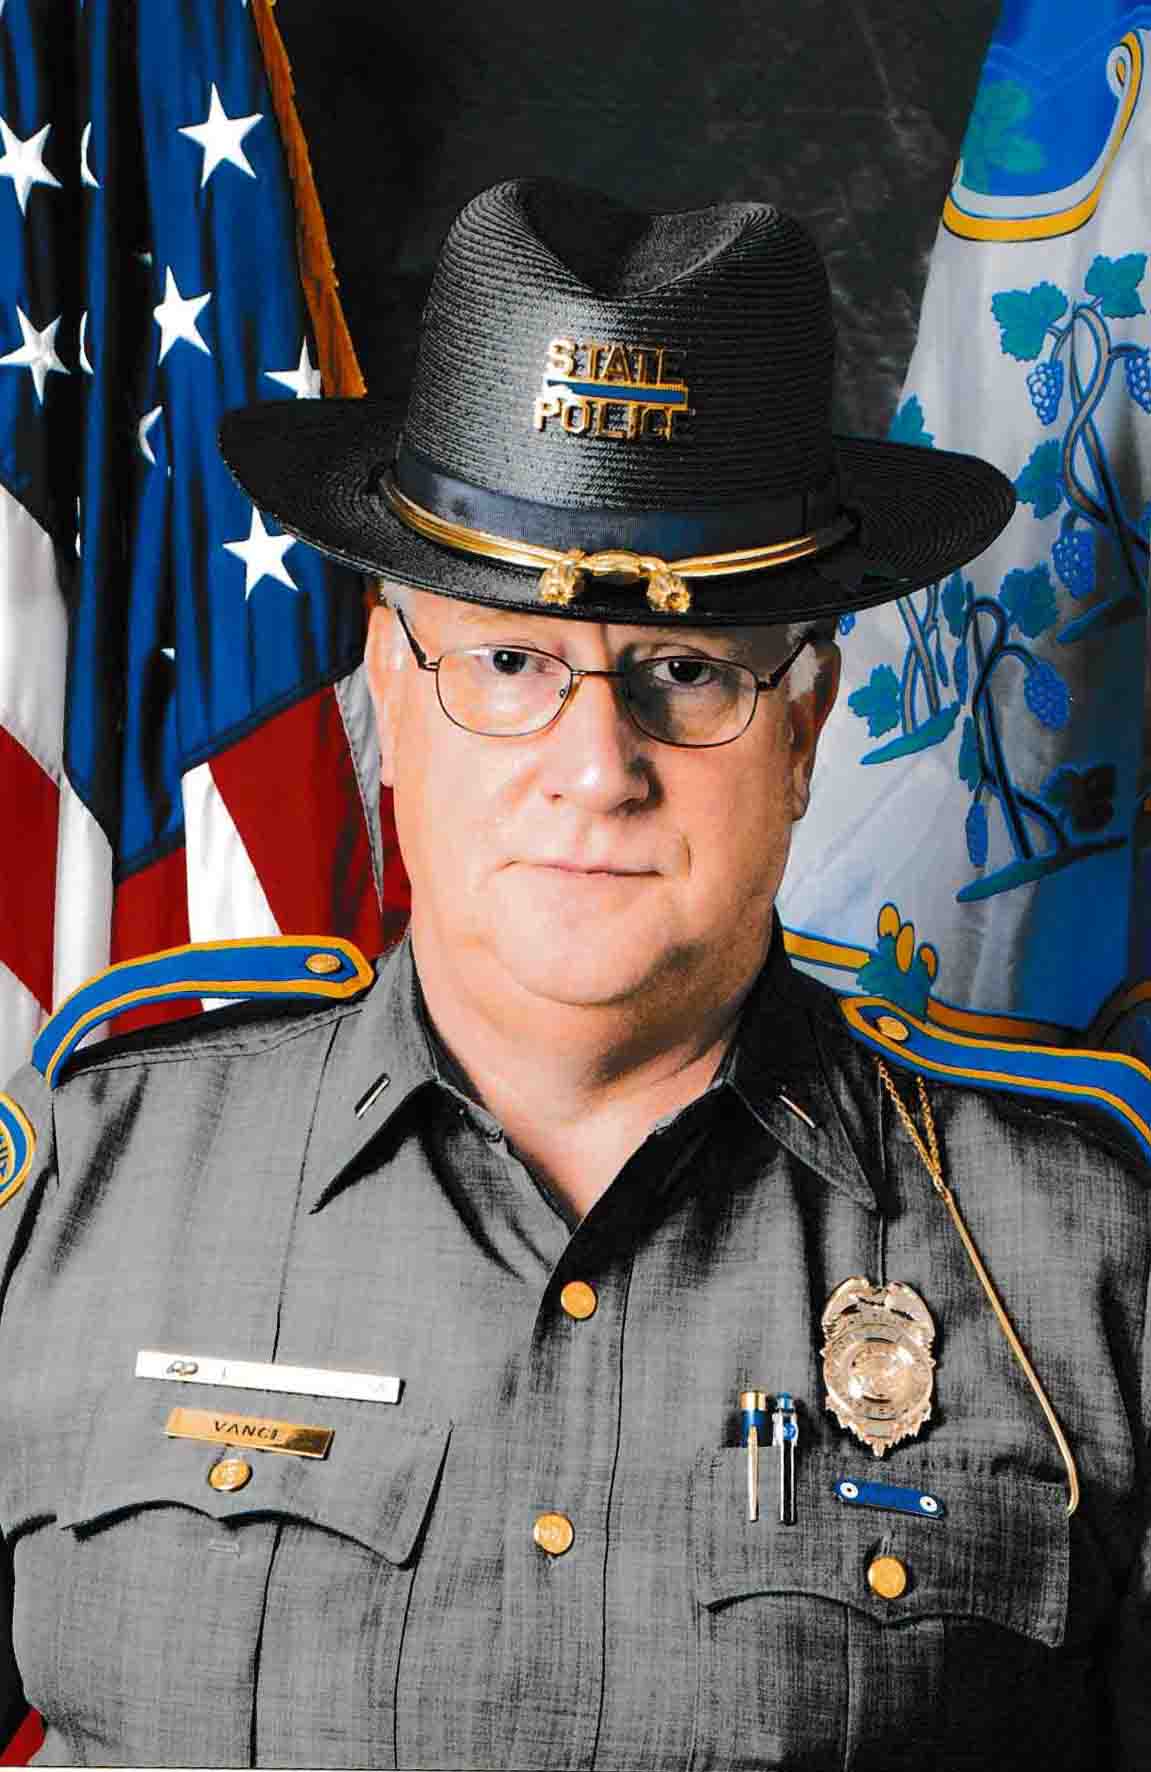 Paul Vance, former lieutenant and chief public information officer for Connecticut State Police